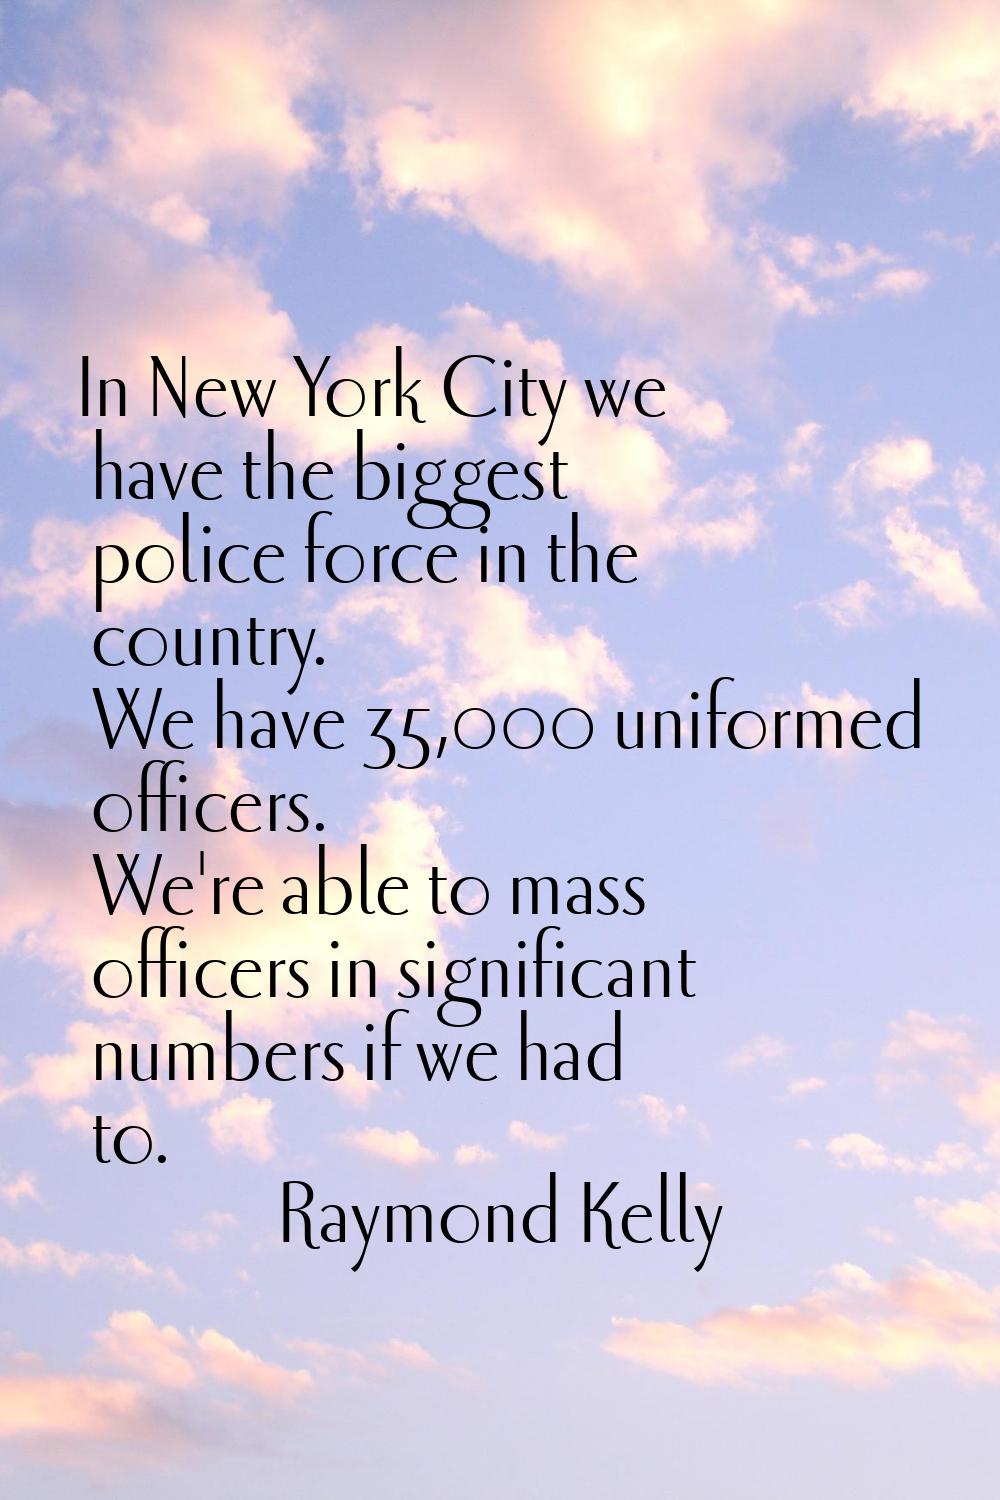 In New York City we have the biggest police force in the country. We have 35,000 uniformed officers